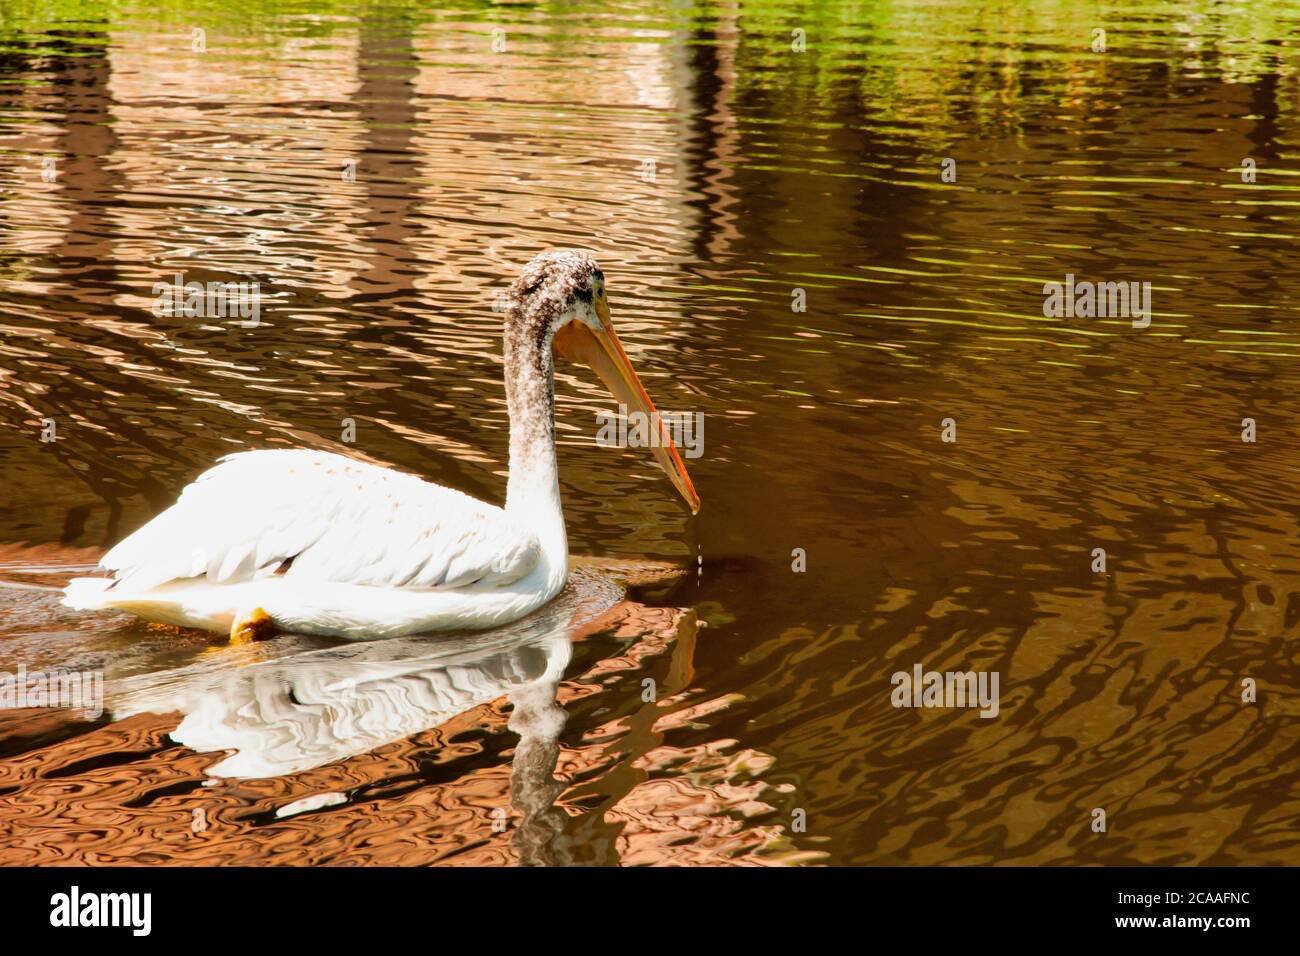 View of an American white pelican swimming in the pond, Pelecanus erythrorhynchos, one of the largest water birds in the world Stock Photo